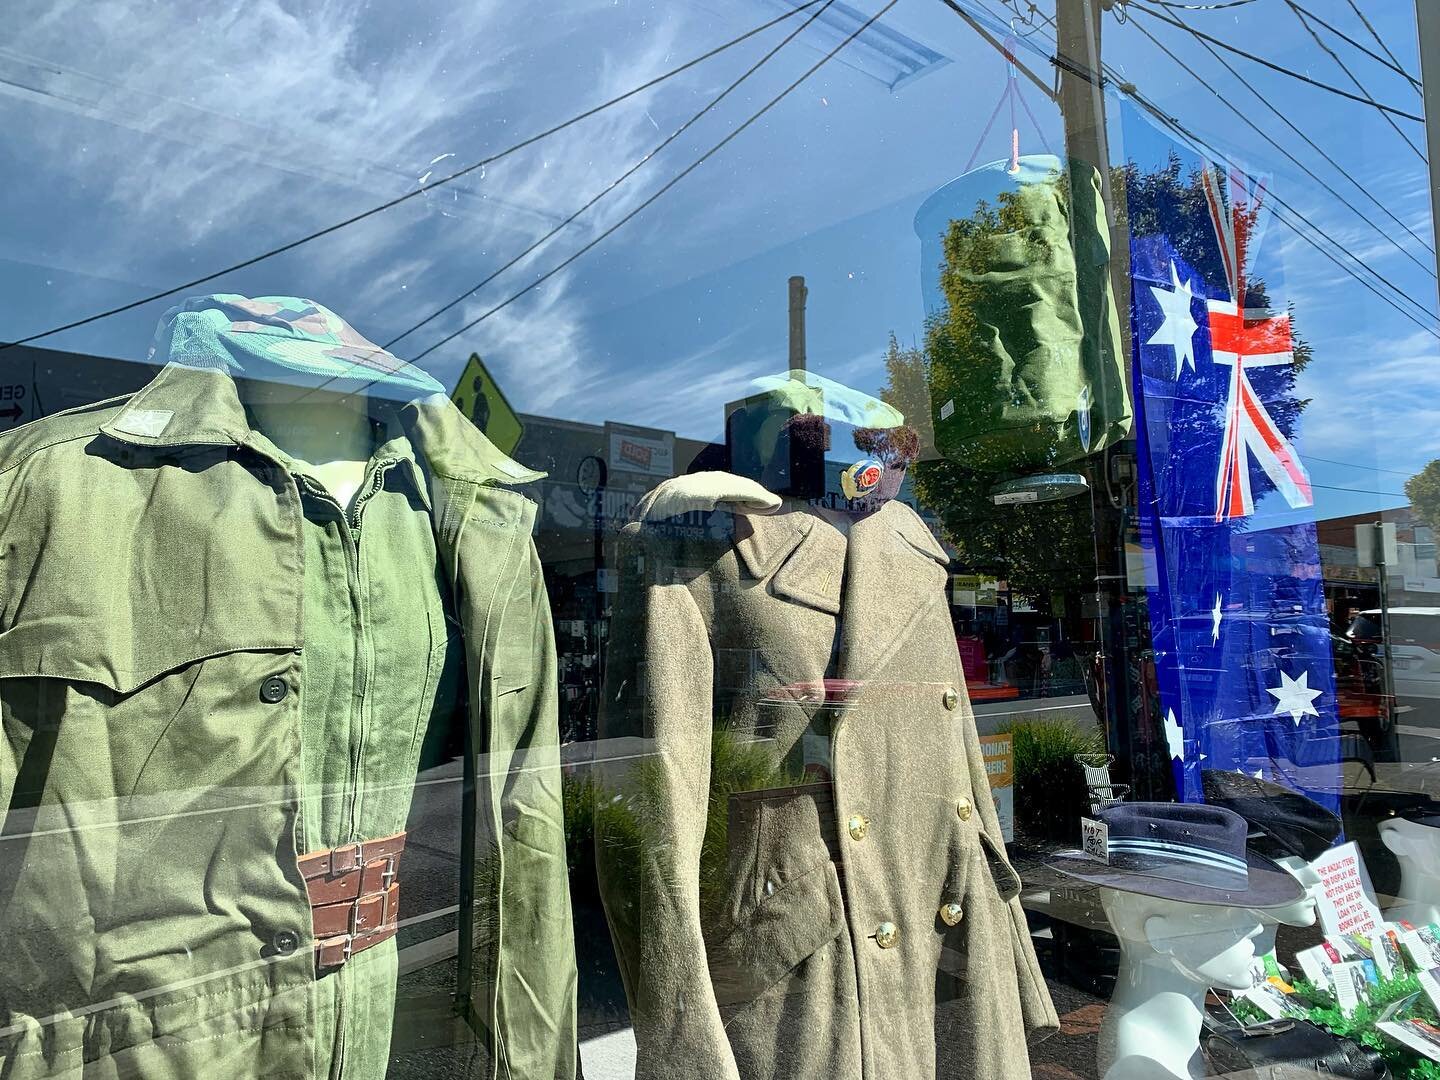 🌺 Reflecting today of all those who served and sacrificed. #anzacday2022. #lestweforget 
.
Photo: Anzac window display Brotherhood of St Laurence Bentleigh.